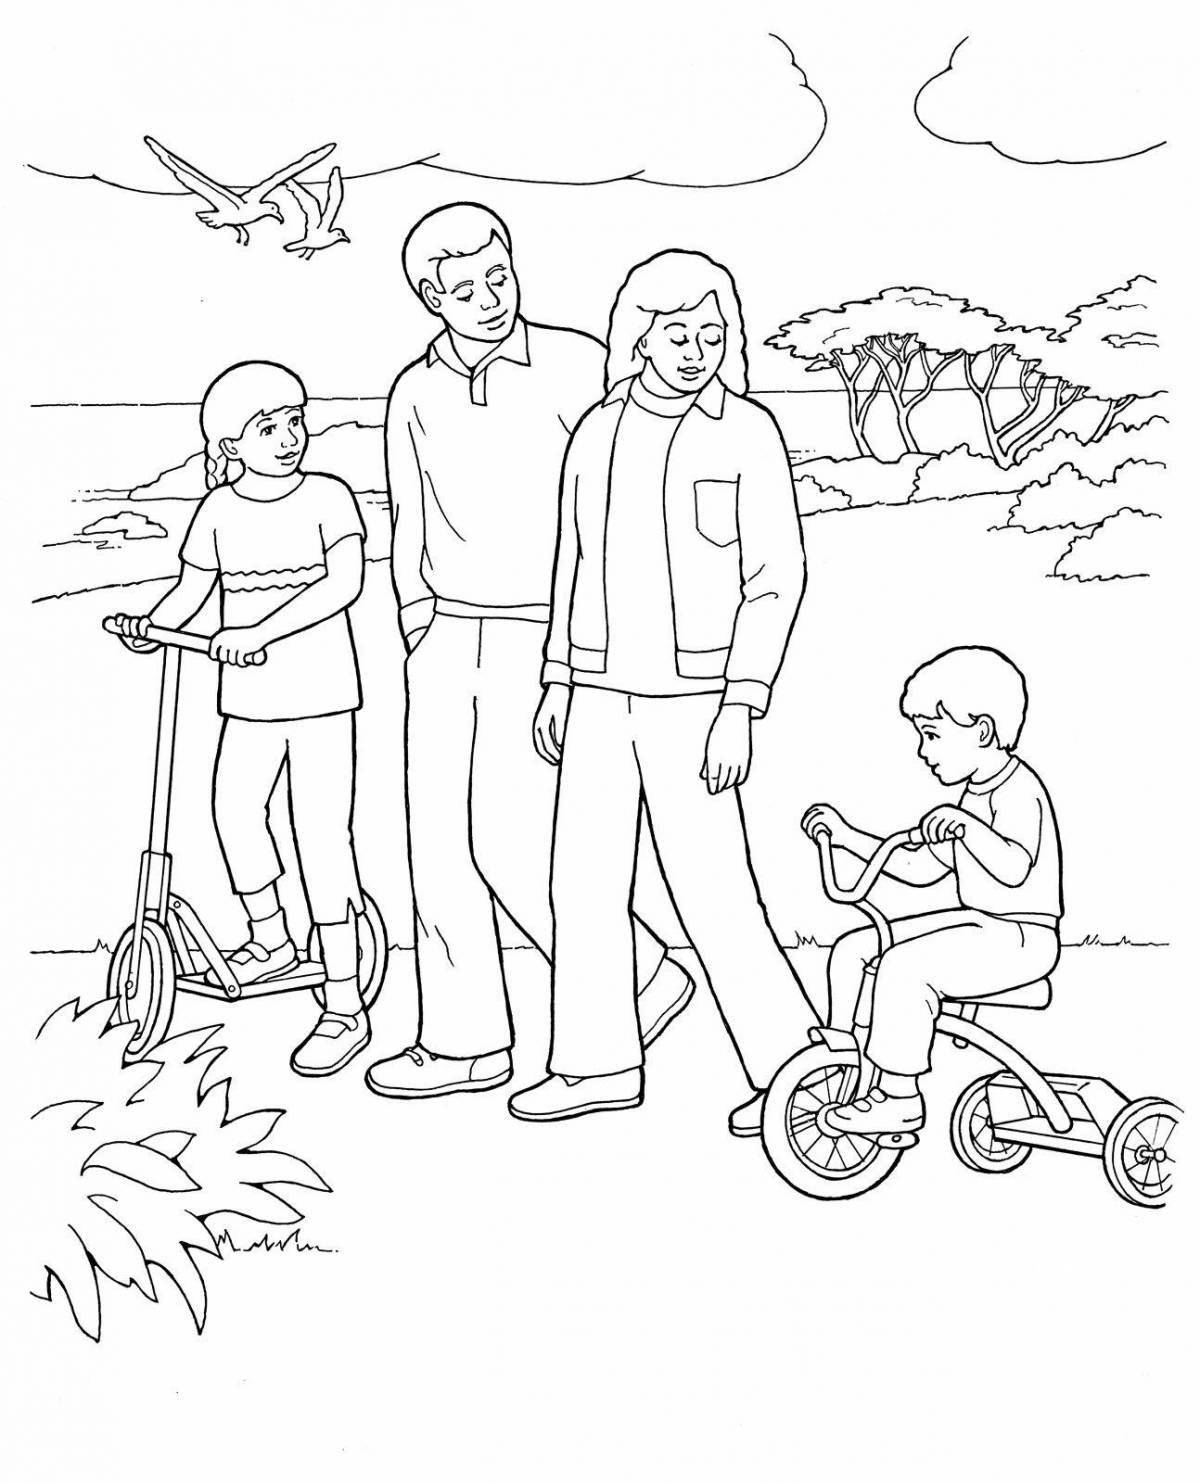 Fun family coloring book for 4-5 year olds